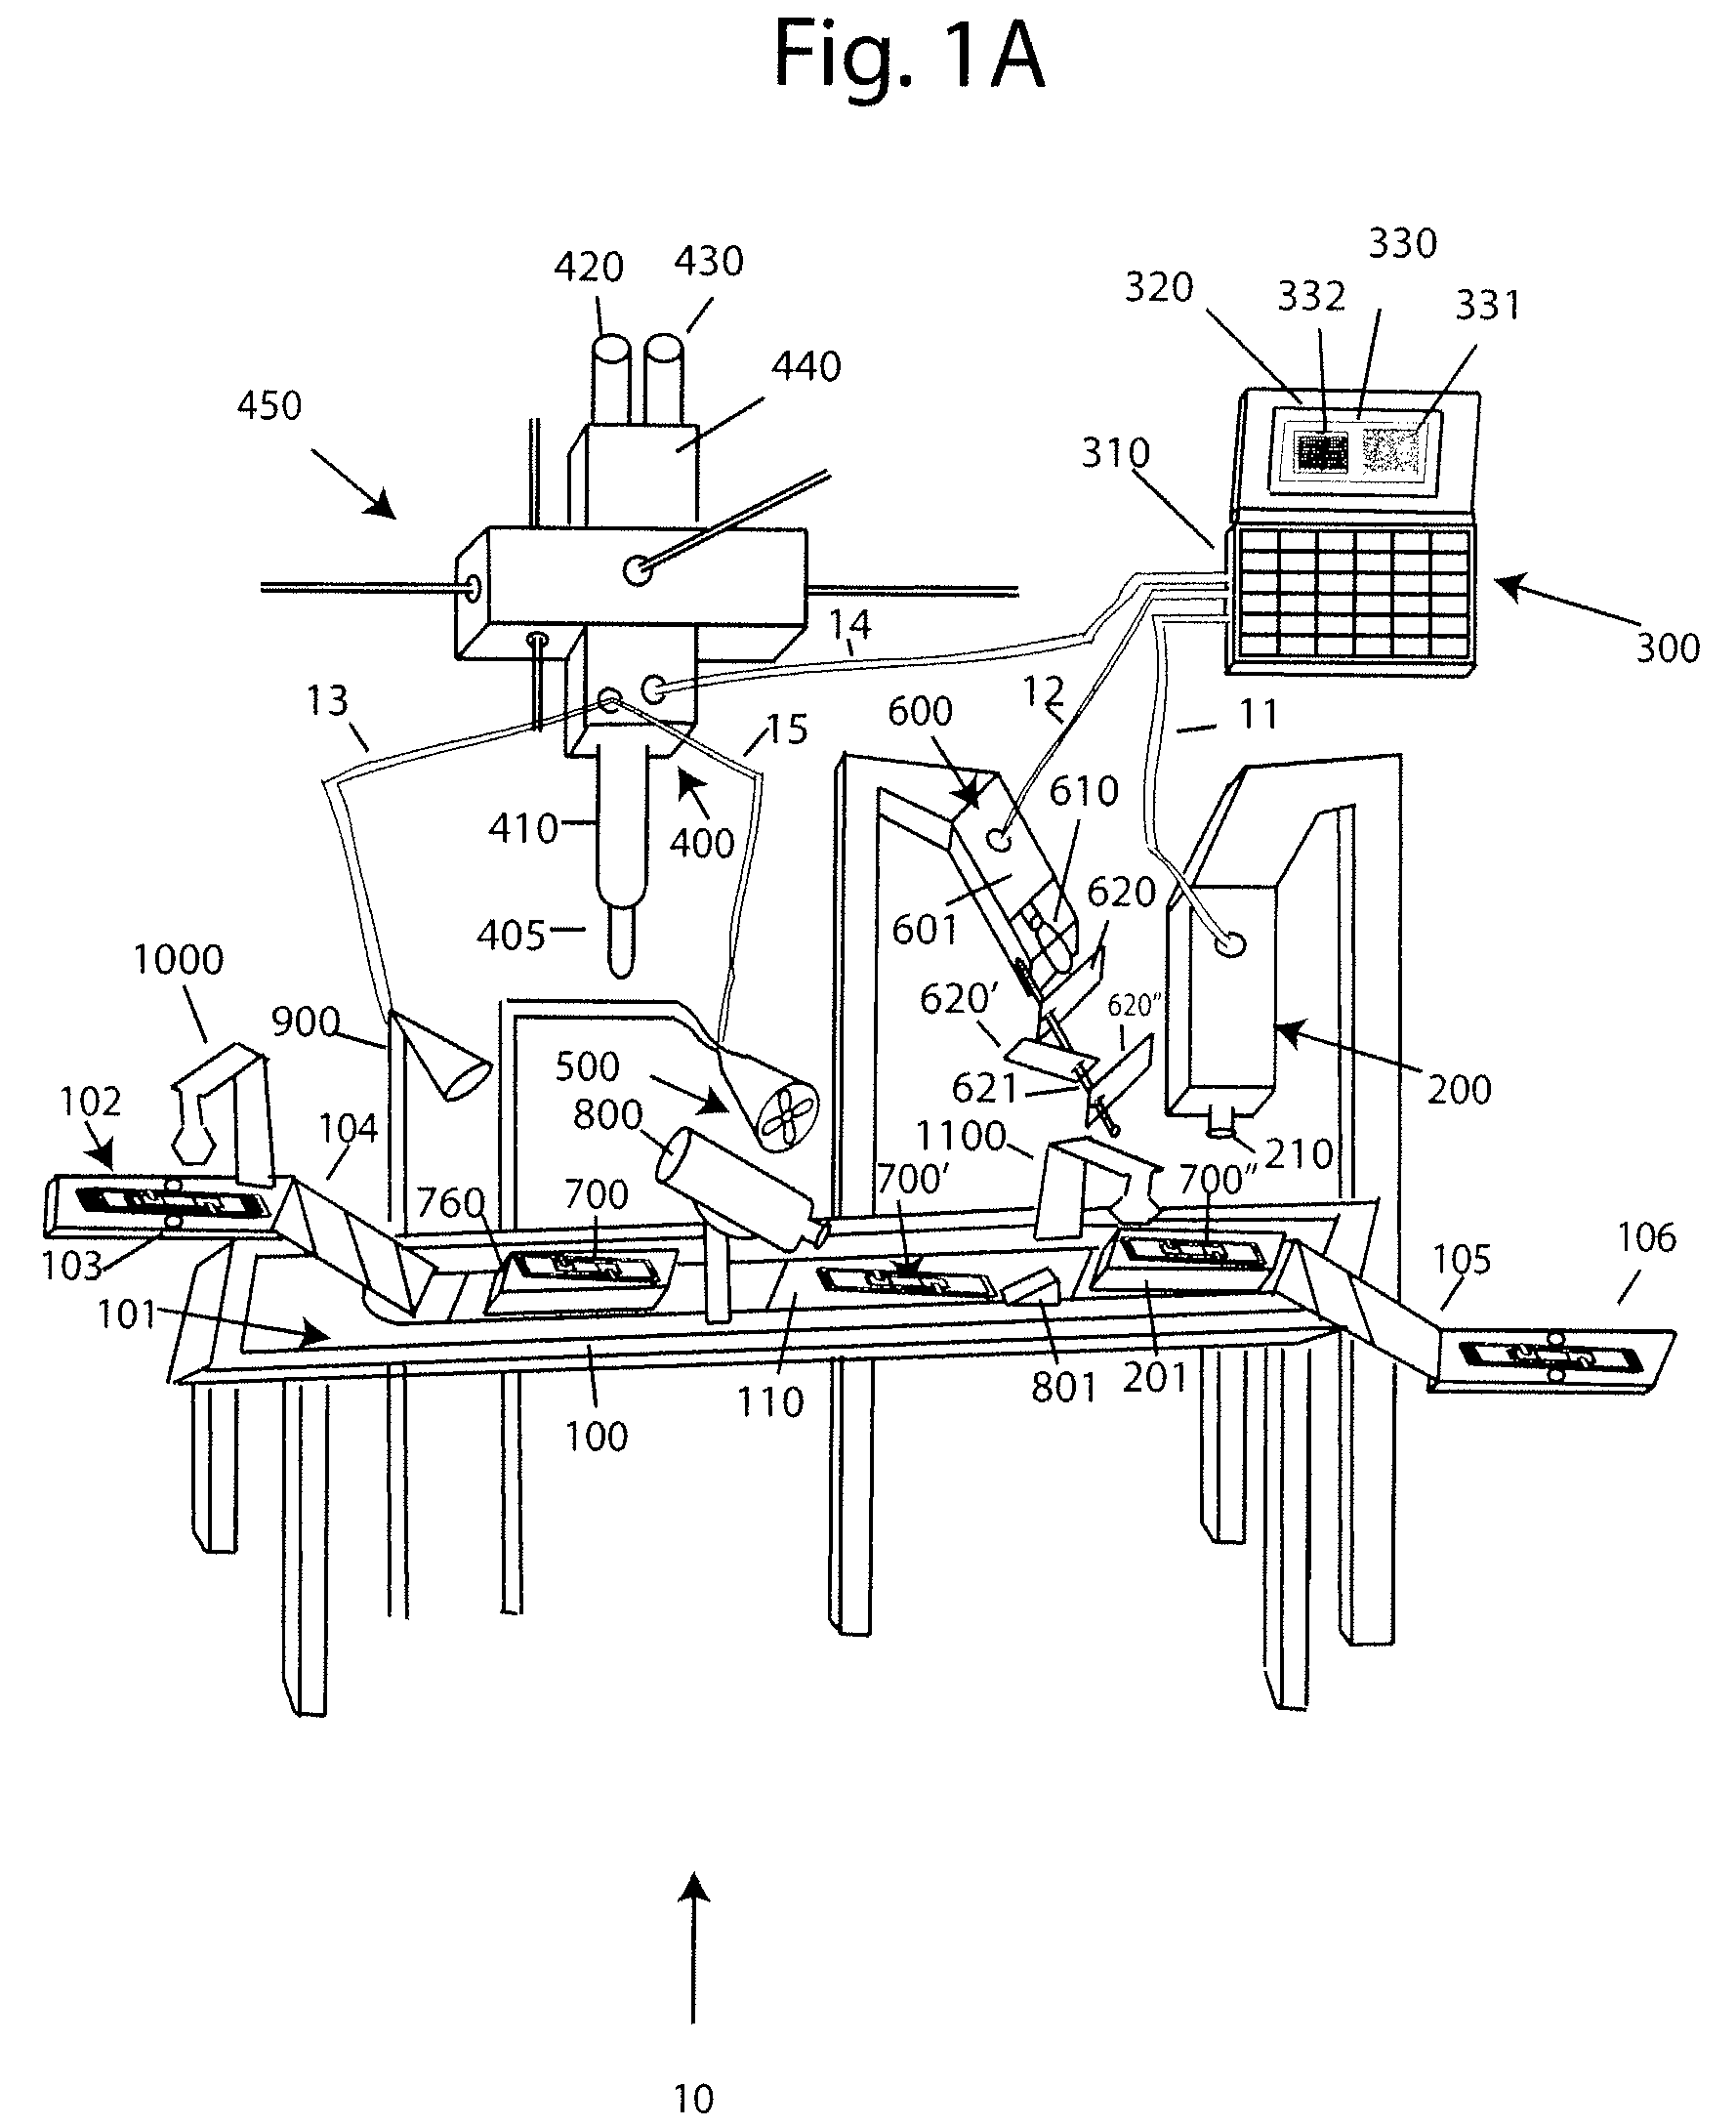 Systems and methods for analyzing body fluids